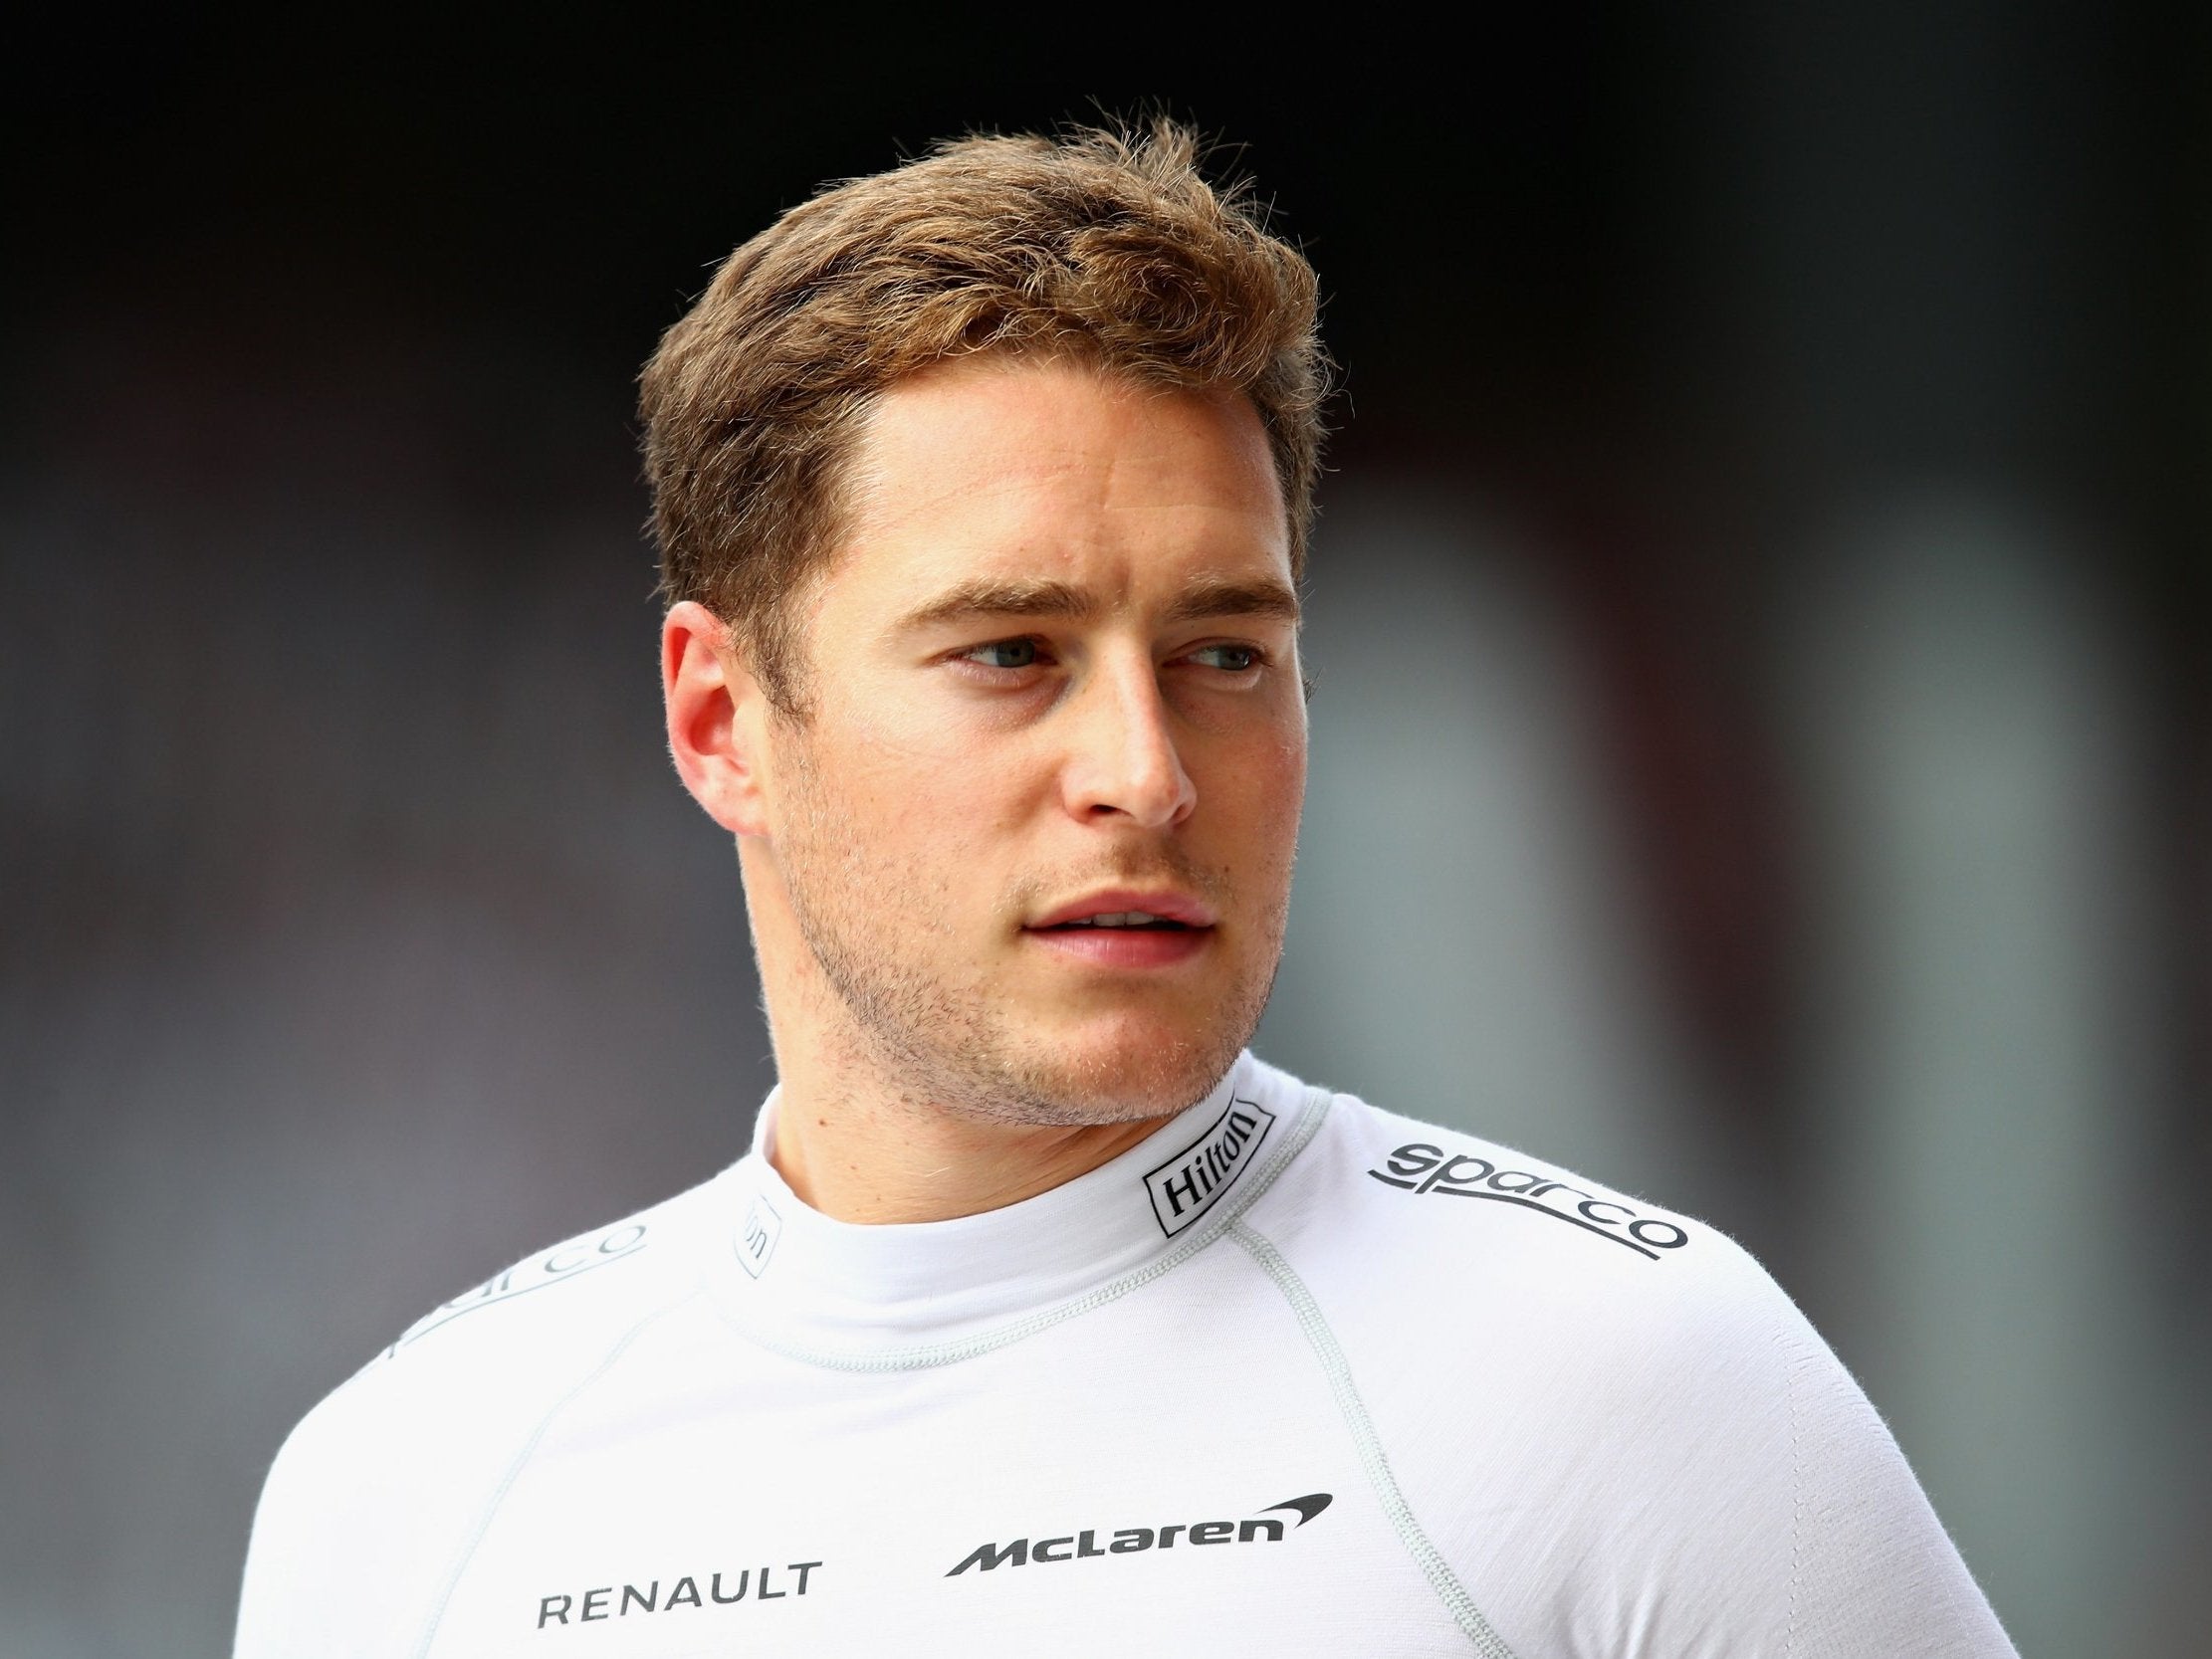 Stoffel Vandoorne will be replaced at McLaren for the 2019 season